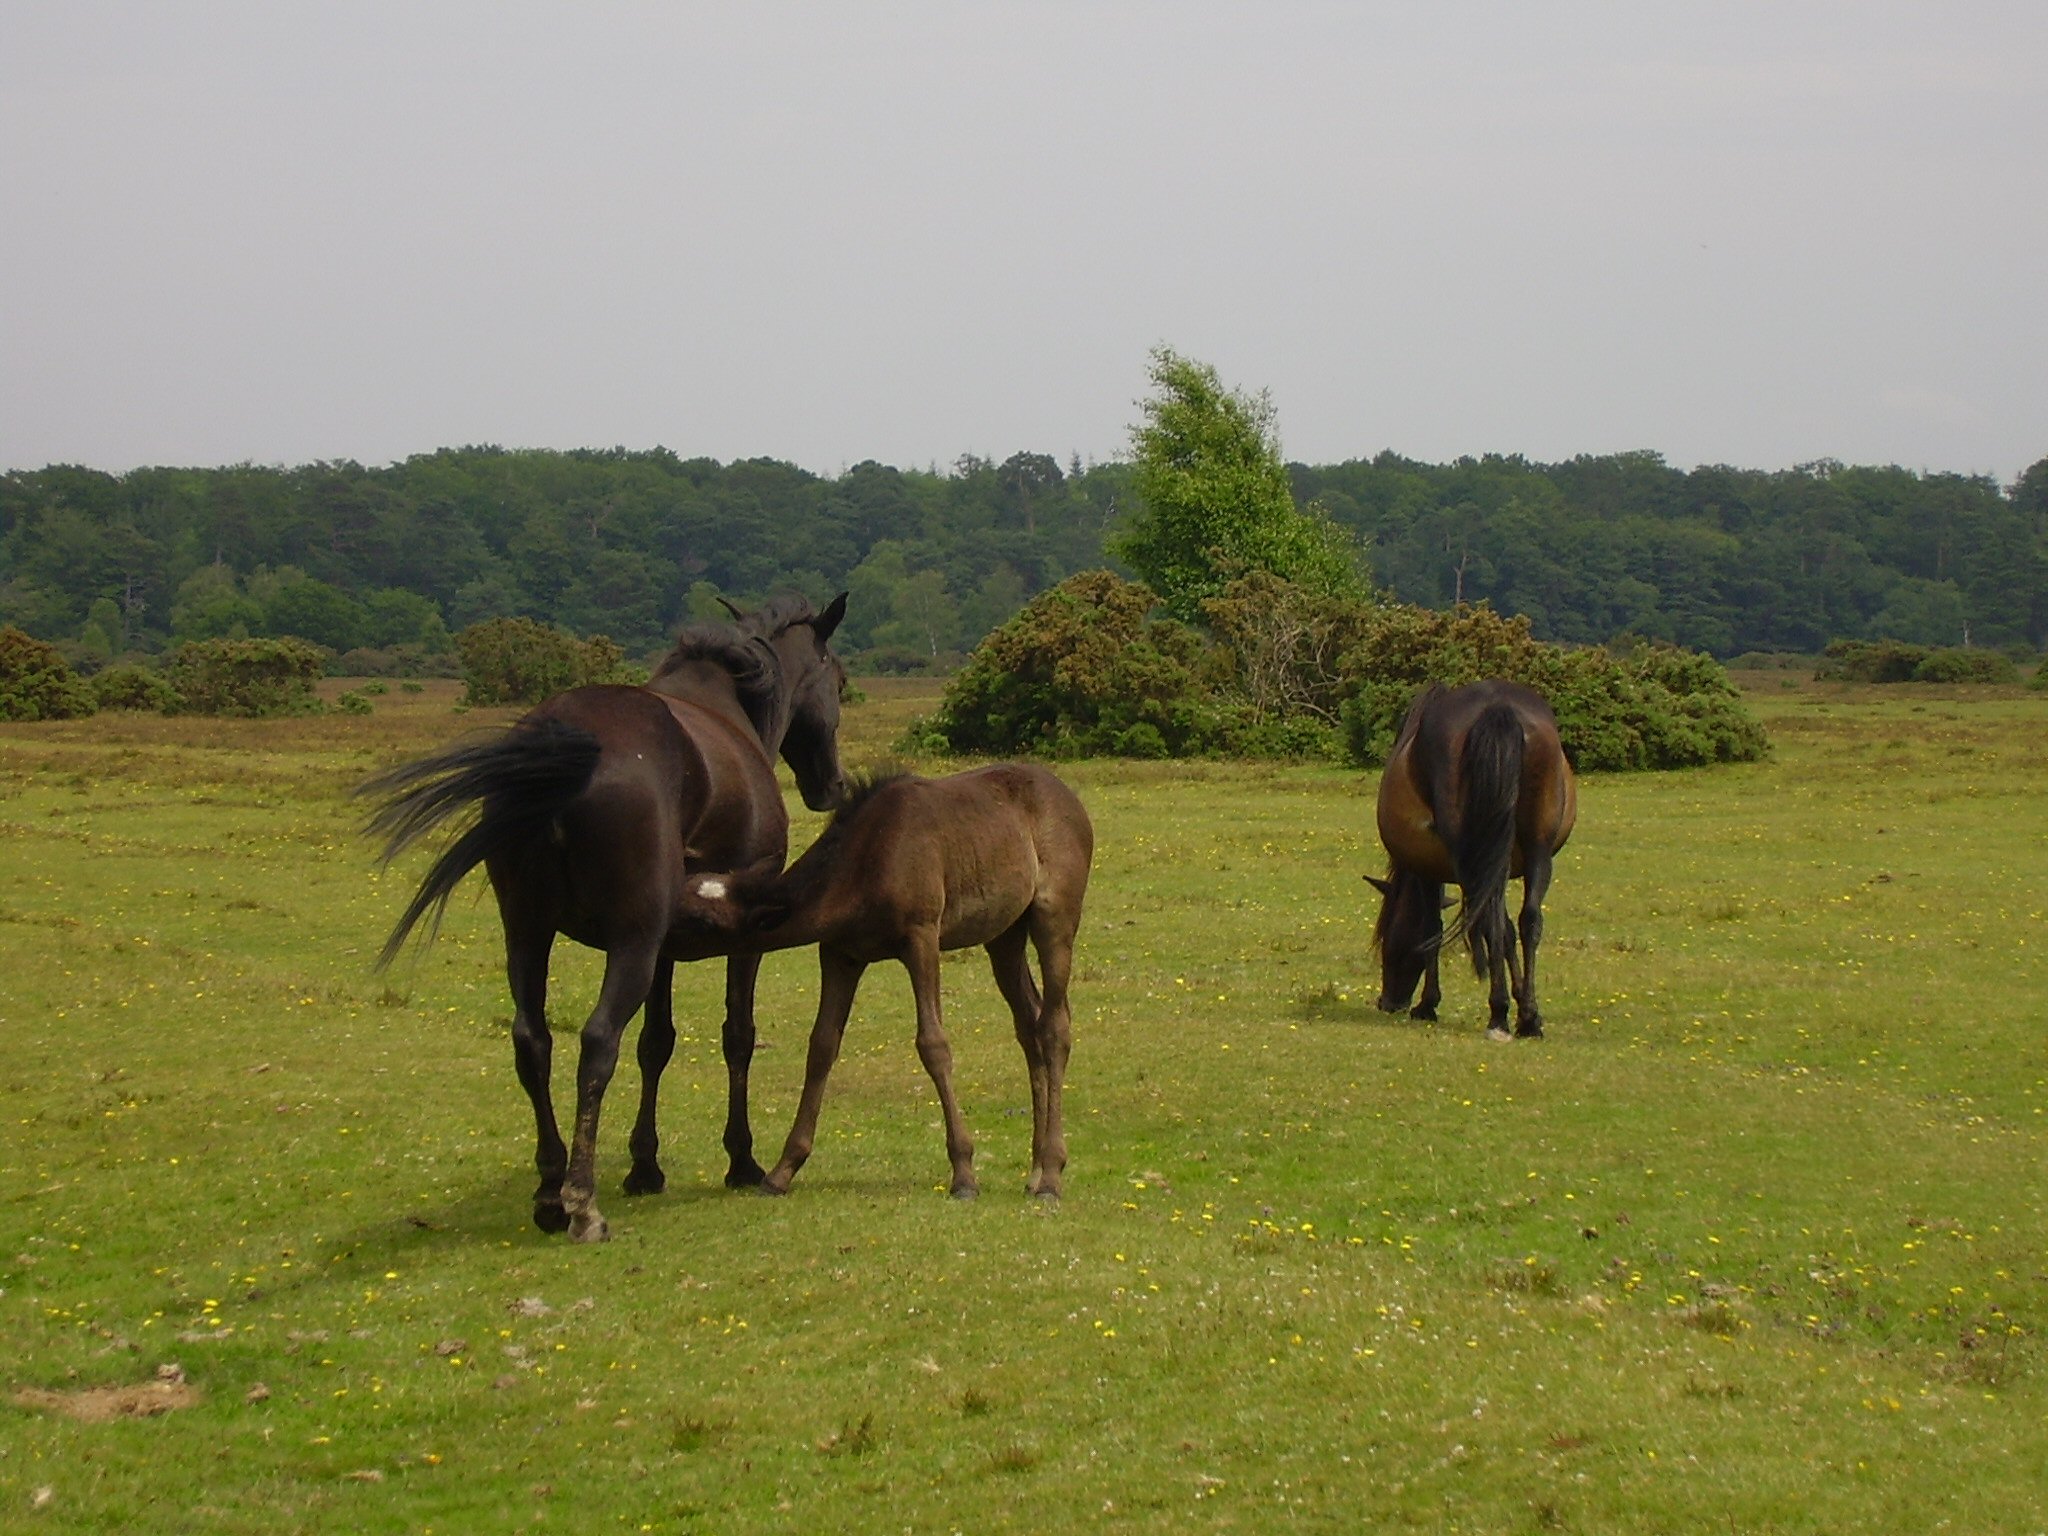 the three horses are grazing in the field